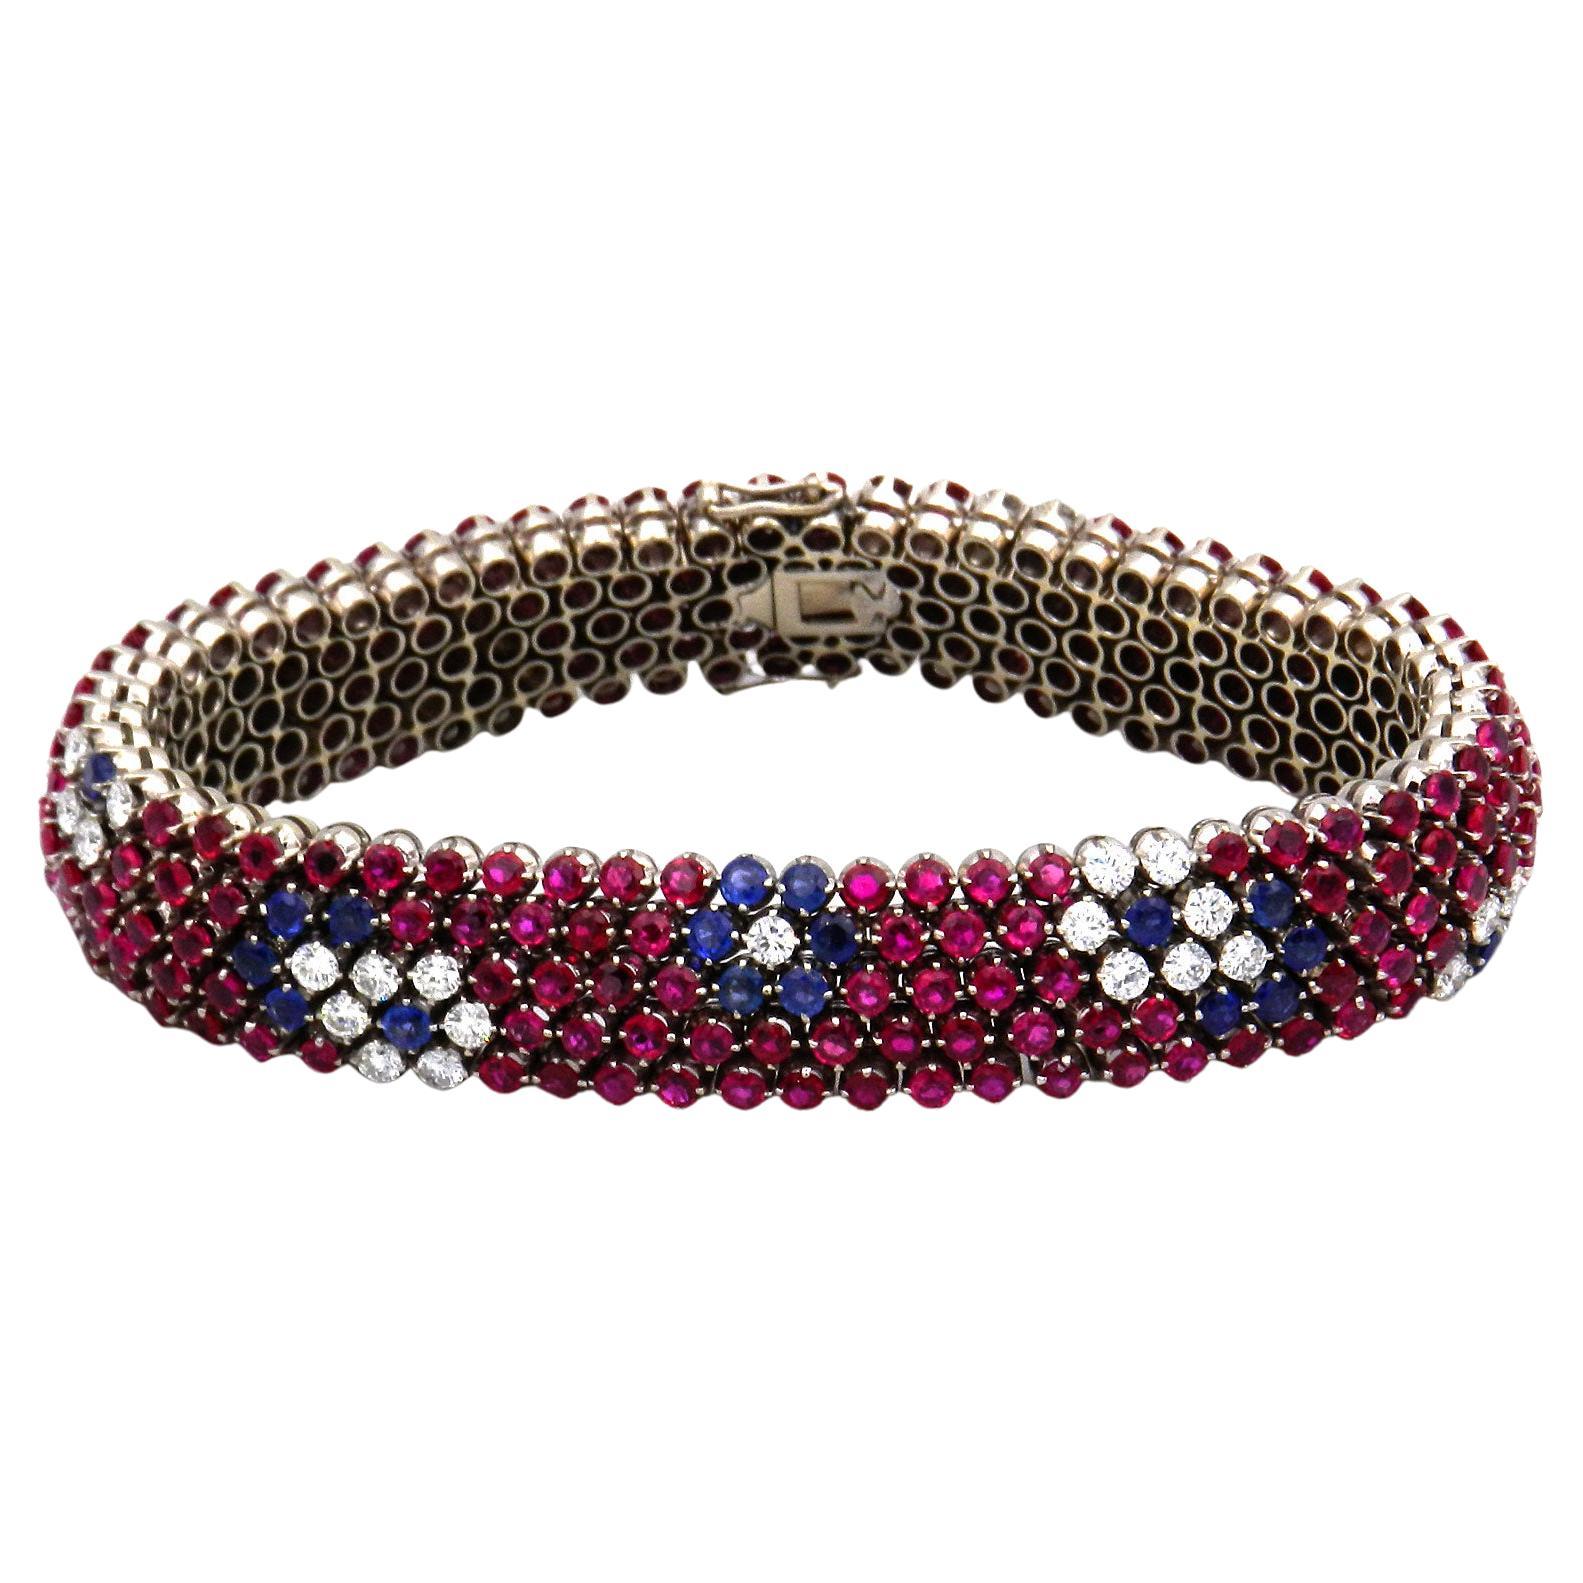 14 Carat Ruby Sapphire and Diamond Bracelet in 18K White Gold

This attractive and very flexible 18K white gold bracelet features 231 mostly natural rubies, additionally decorated with flower motifs made of natural blue sapphires and 1.85 carat